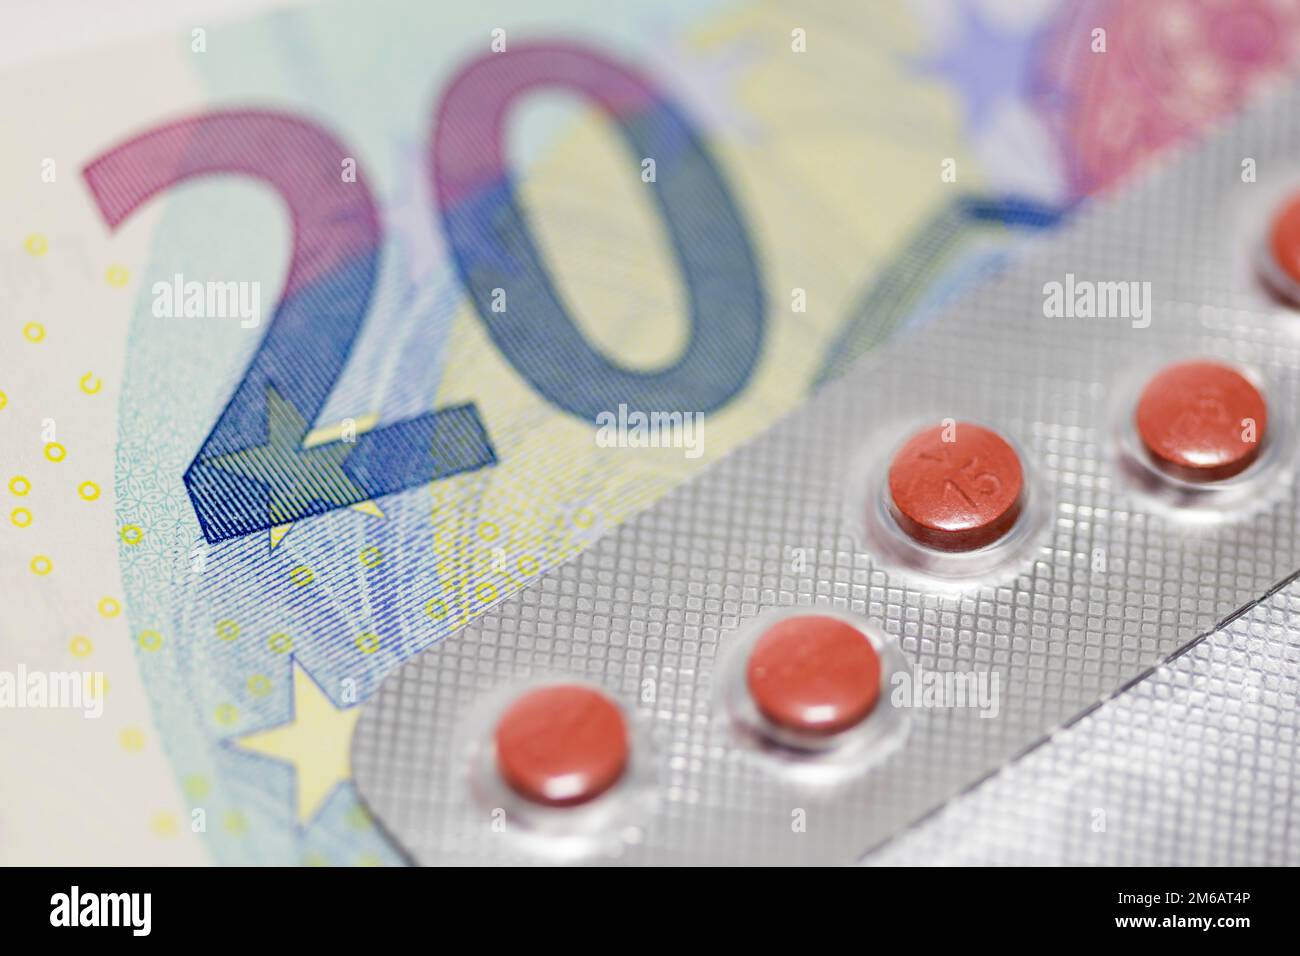 Tablets, blister packaging, medicines, banknotes, symbol image, medical costs, costs Stock Photo